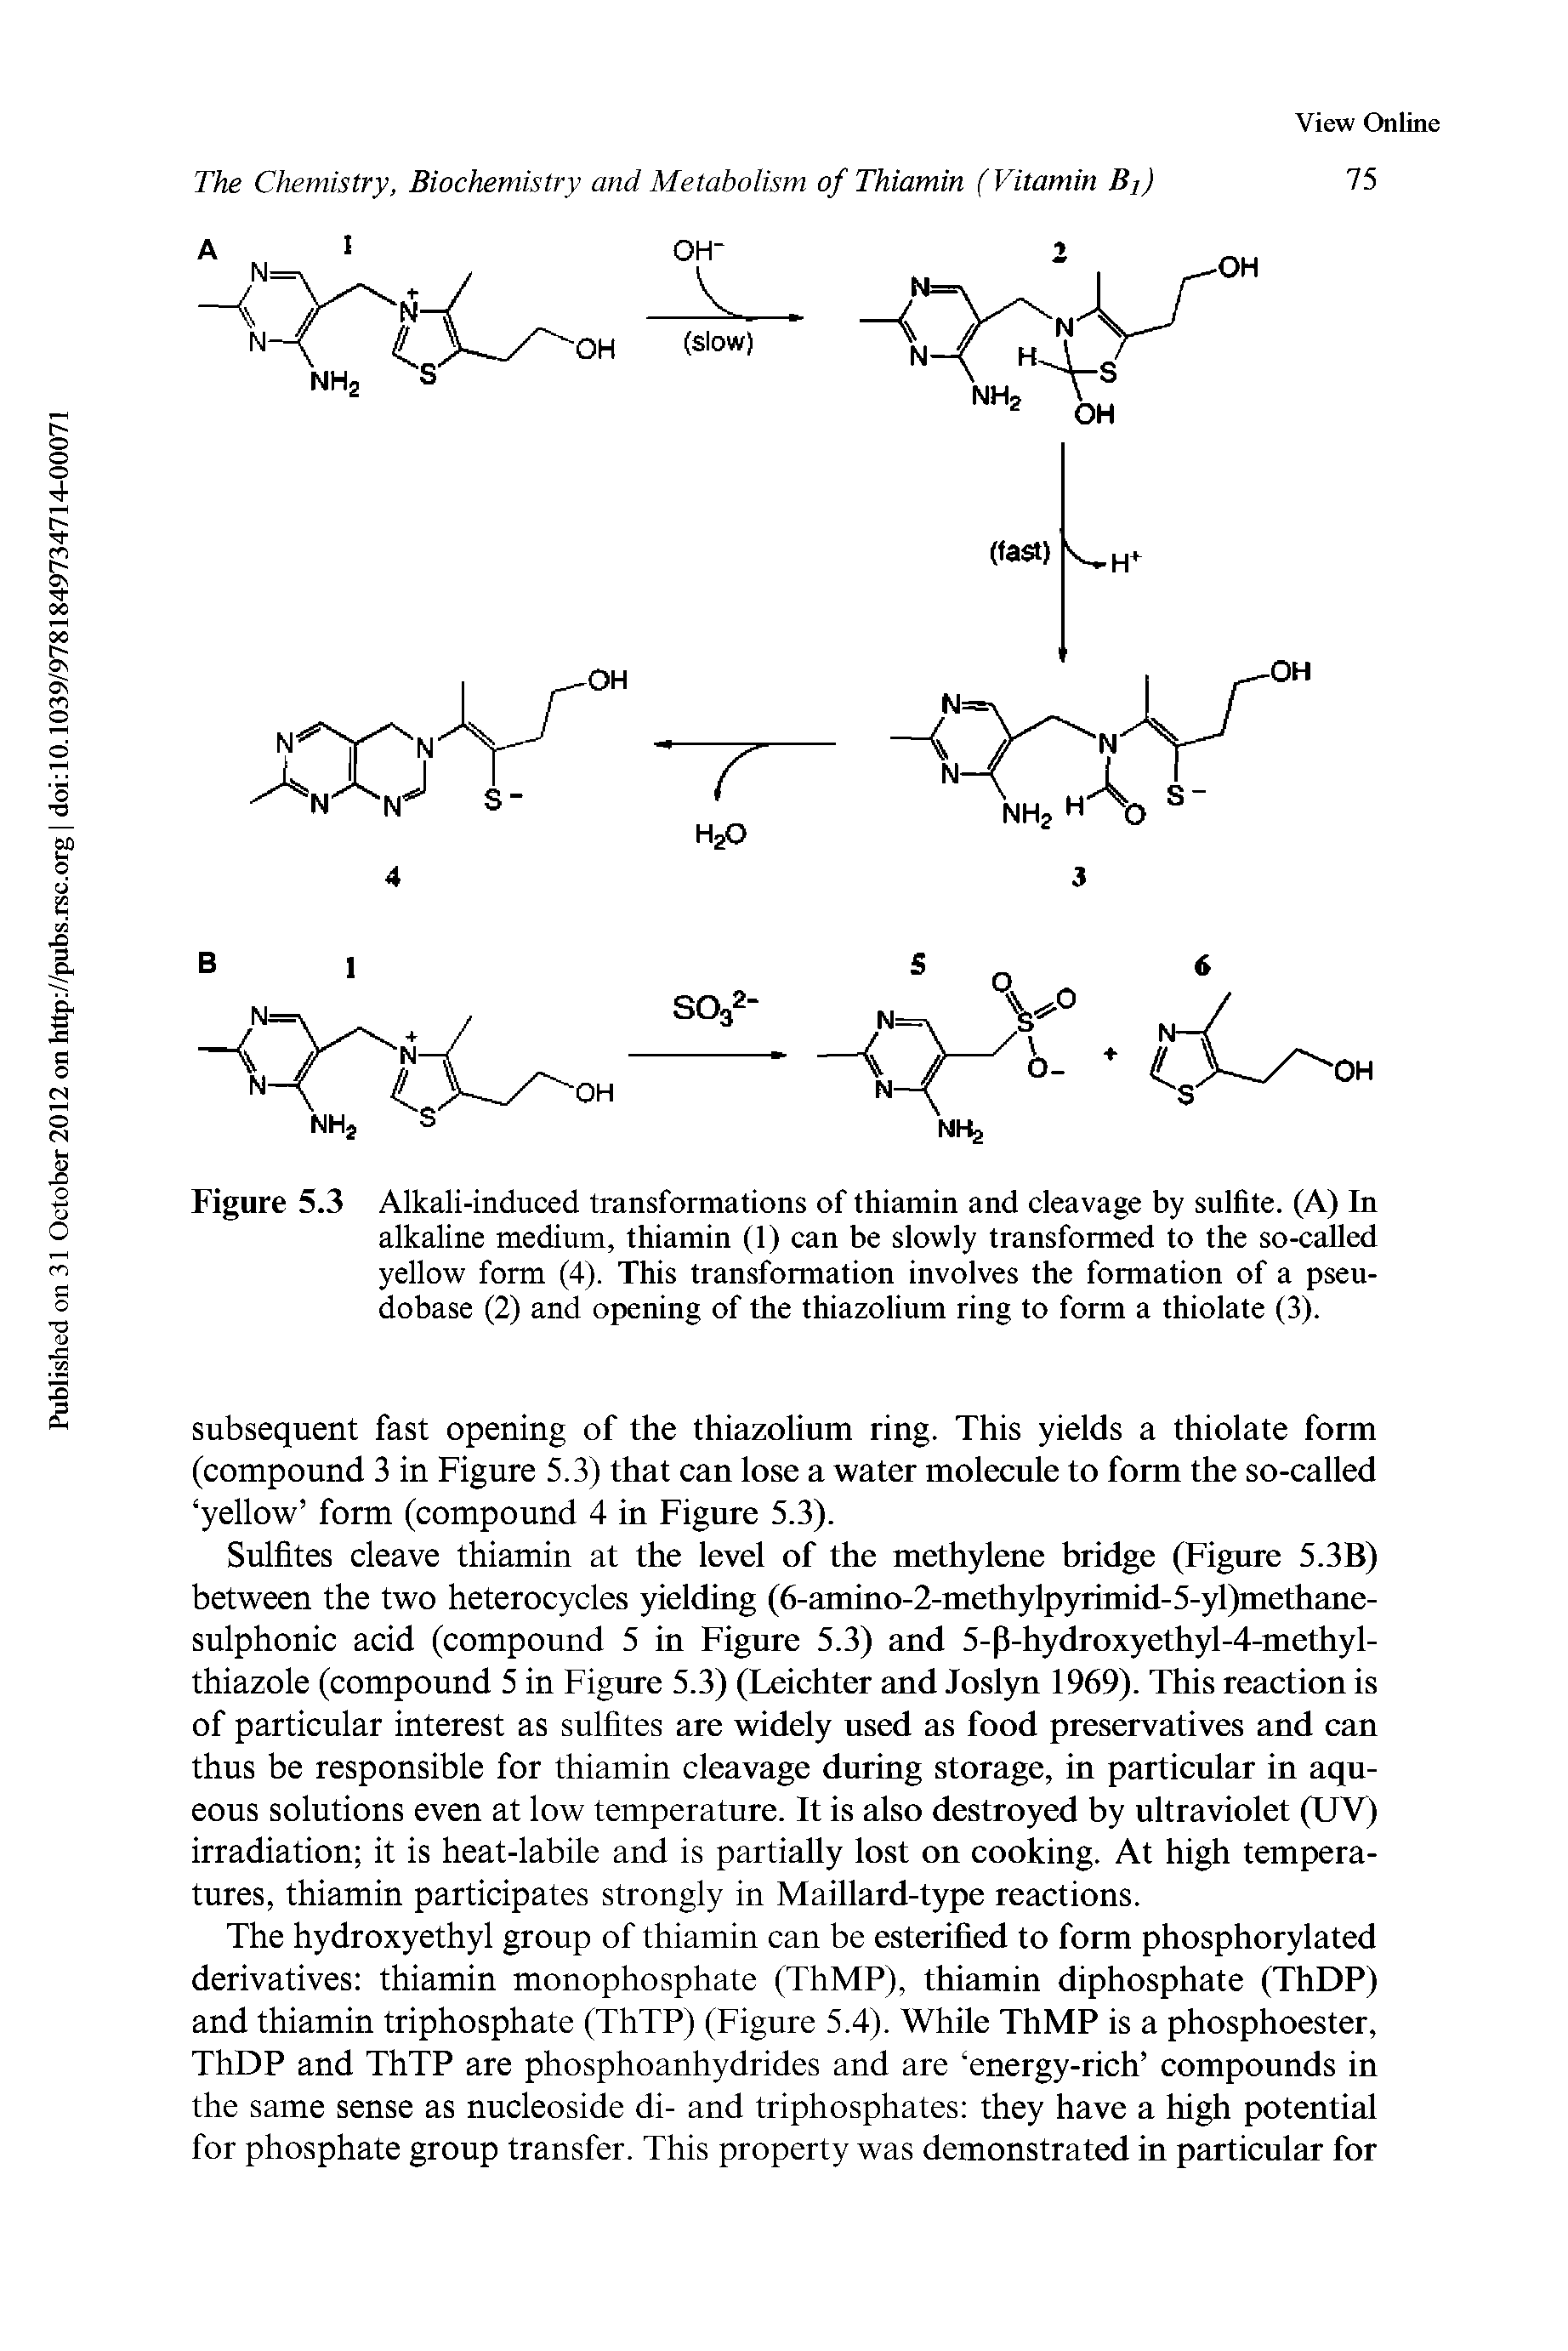 Figure 5.3 Alkali-induced transformations of thiamin and cleavage by sulfite. (A) In alkaline medium, thiamin (1) can be slowly transformed to the so-called yellow form (4). This transformation involves the formation of a pseudobase (2) and opening of the thiazolium ring to form a thiolate (3).